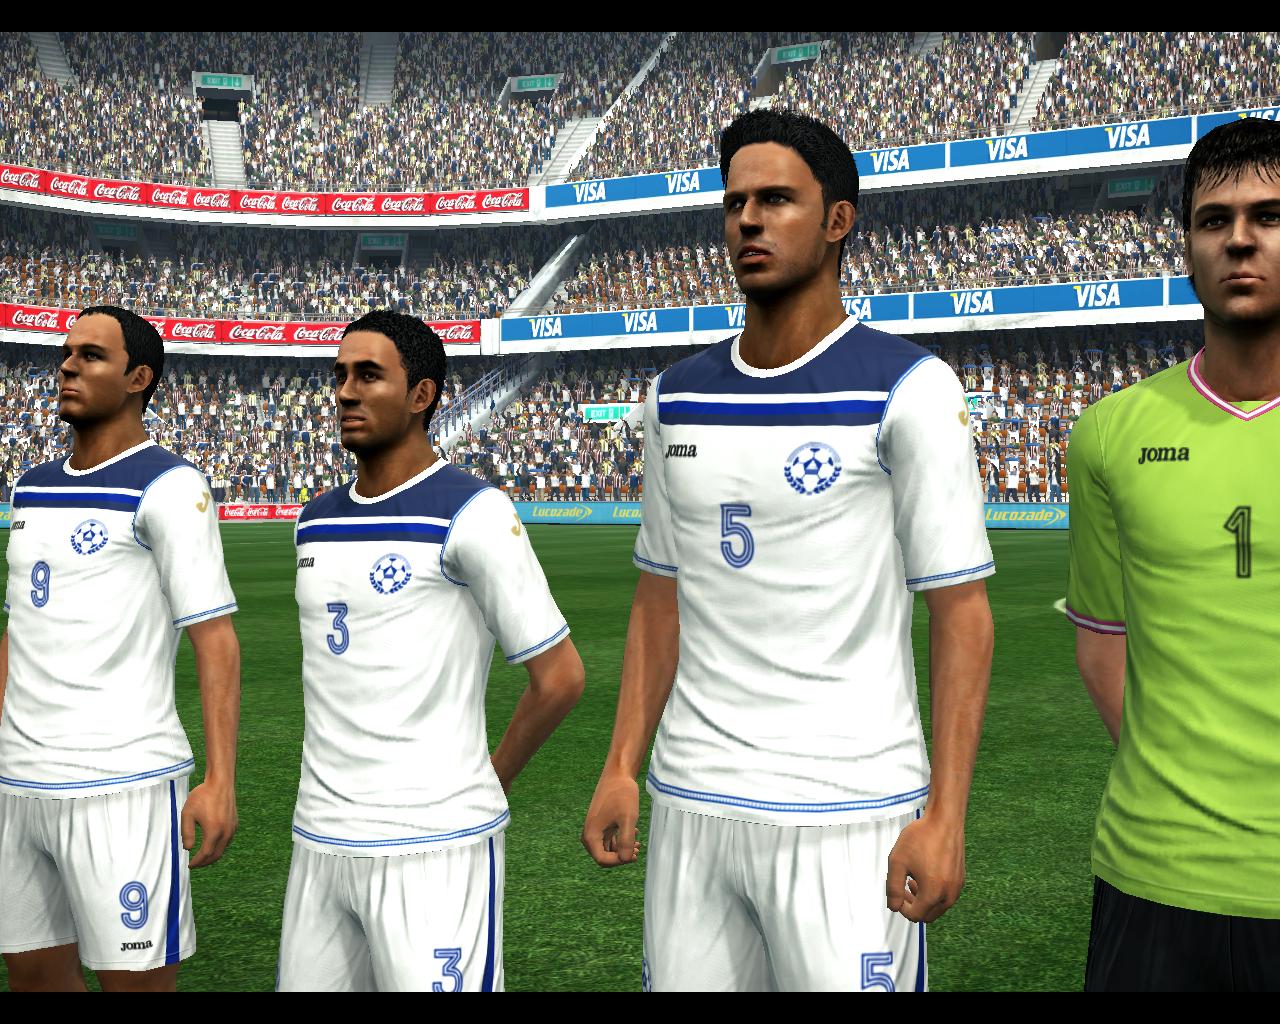 All national teams patch pes 2016 download